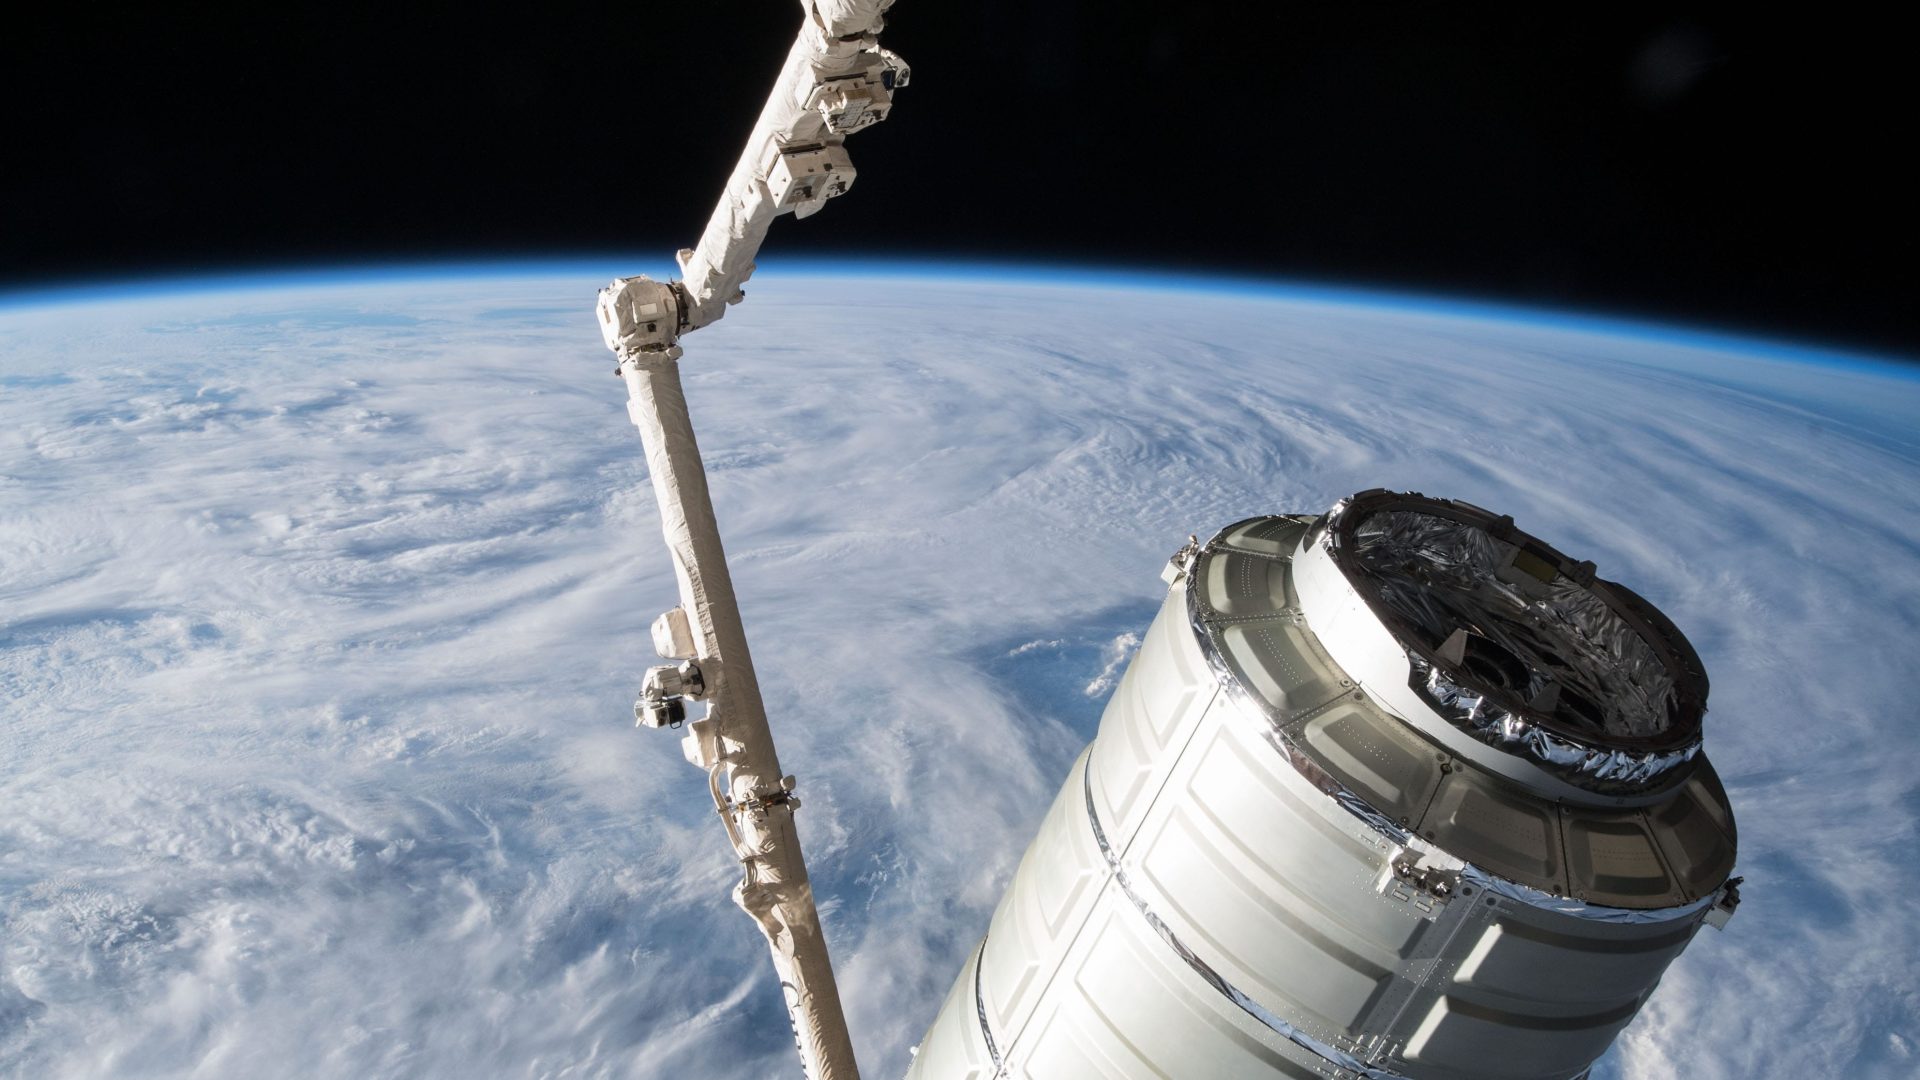 The Orbital ATK space freighter is slowly maneuvered by the Canadarm2 robotic arm scaled